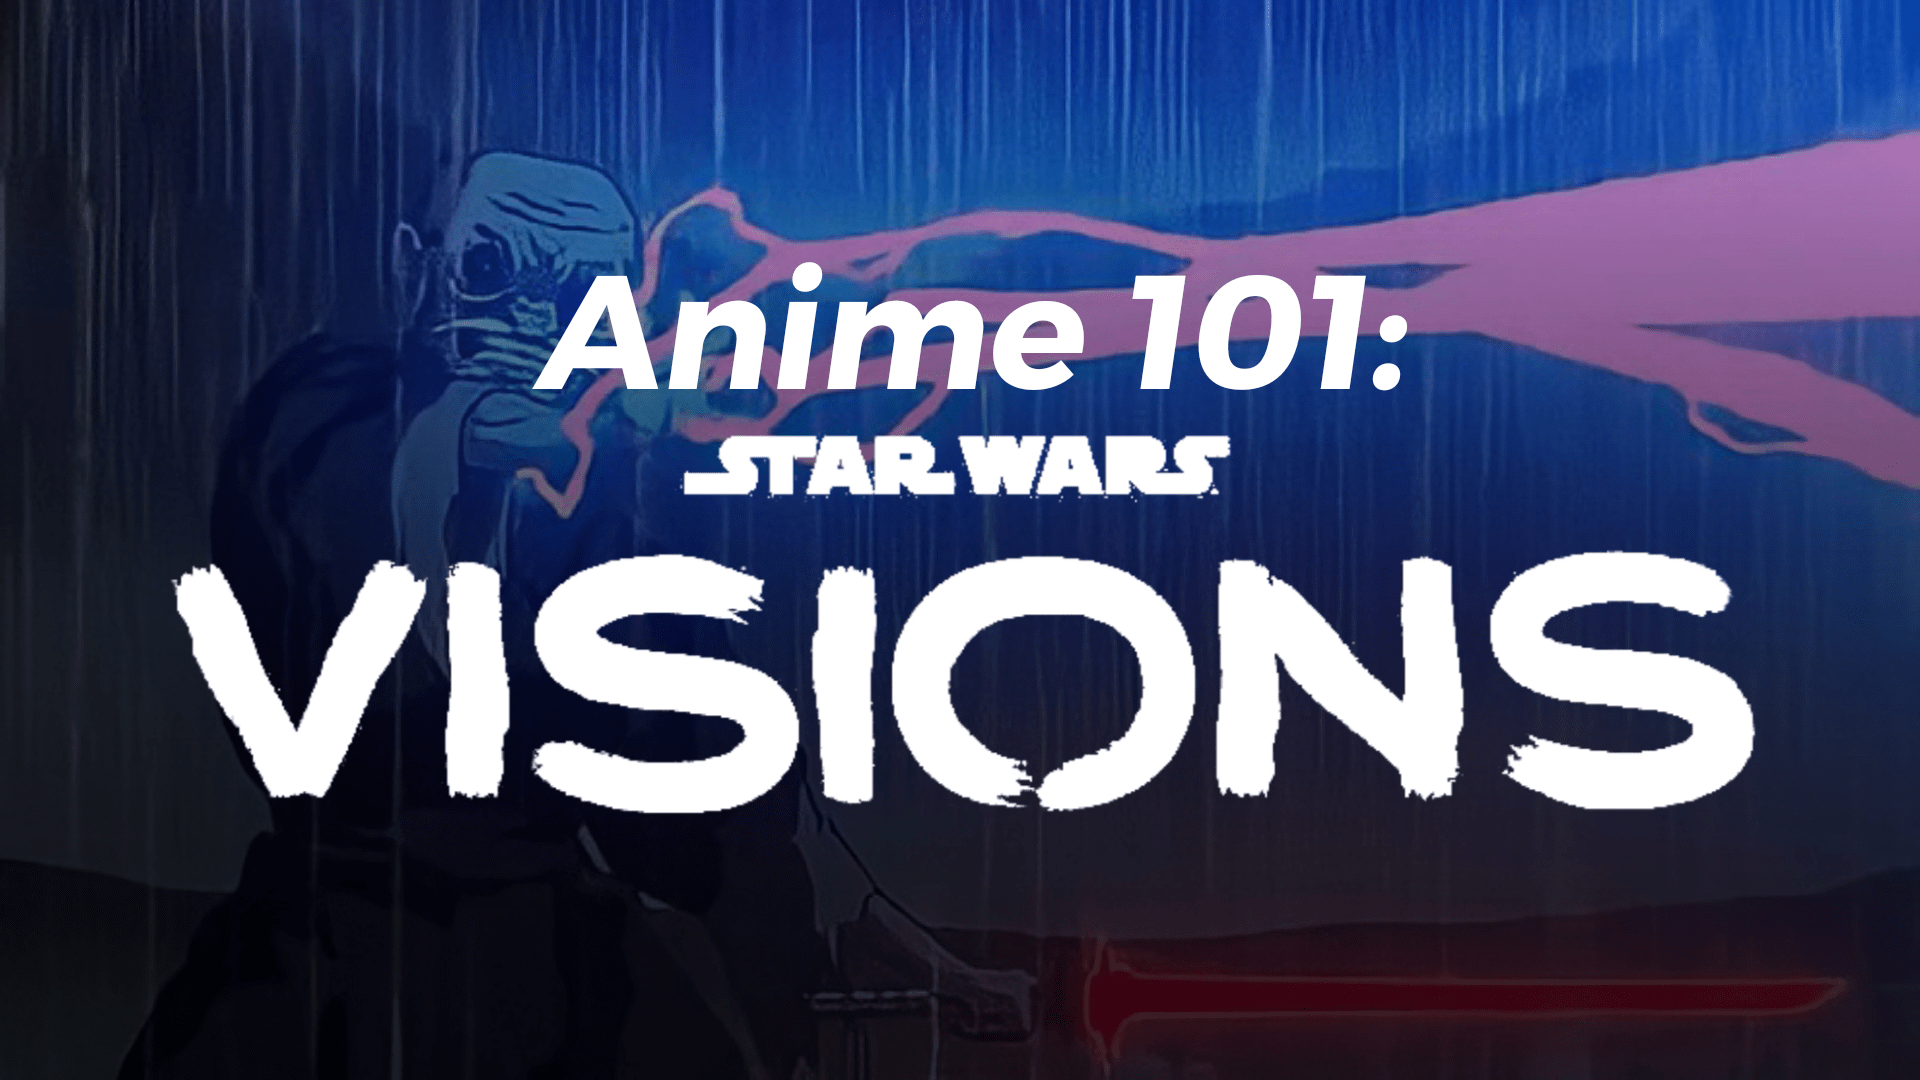 Star Wars: Visions as an Anime Primer?